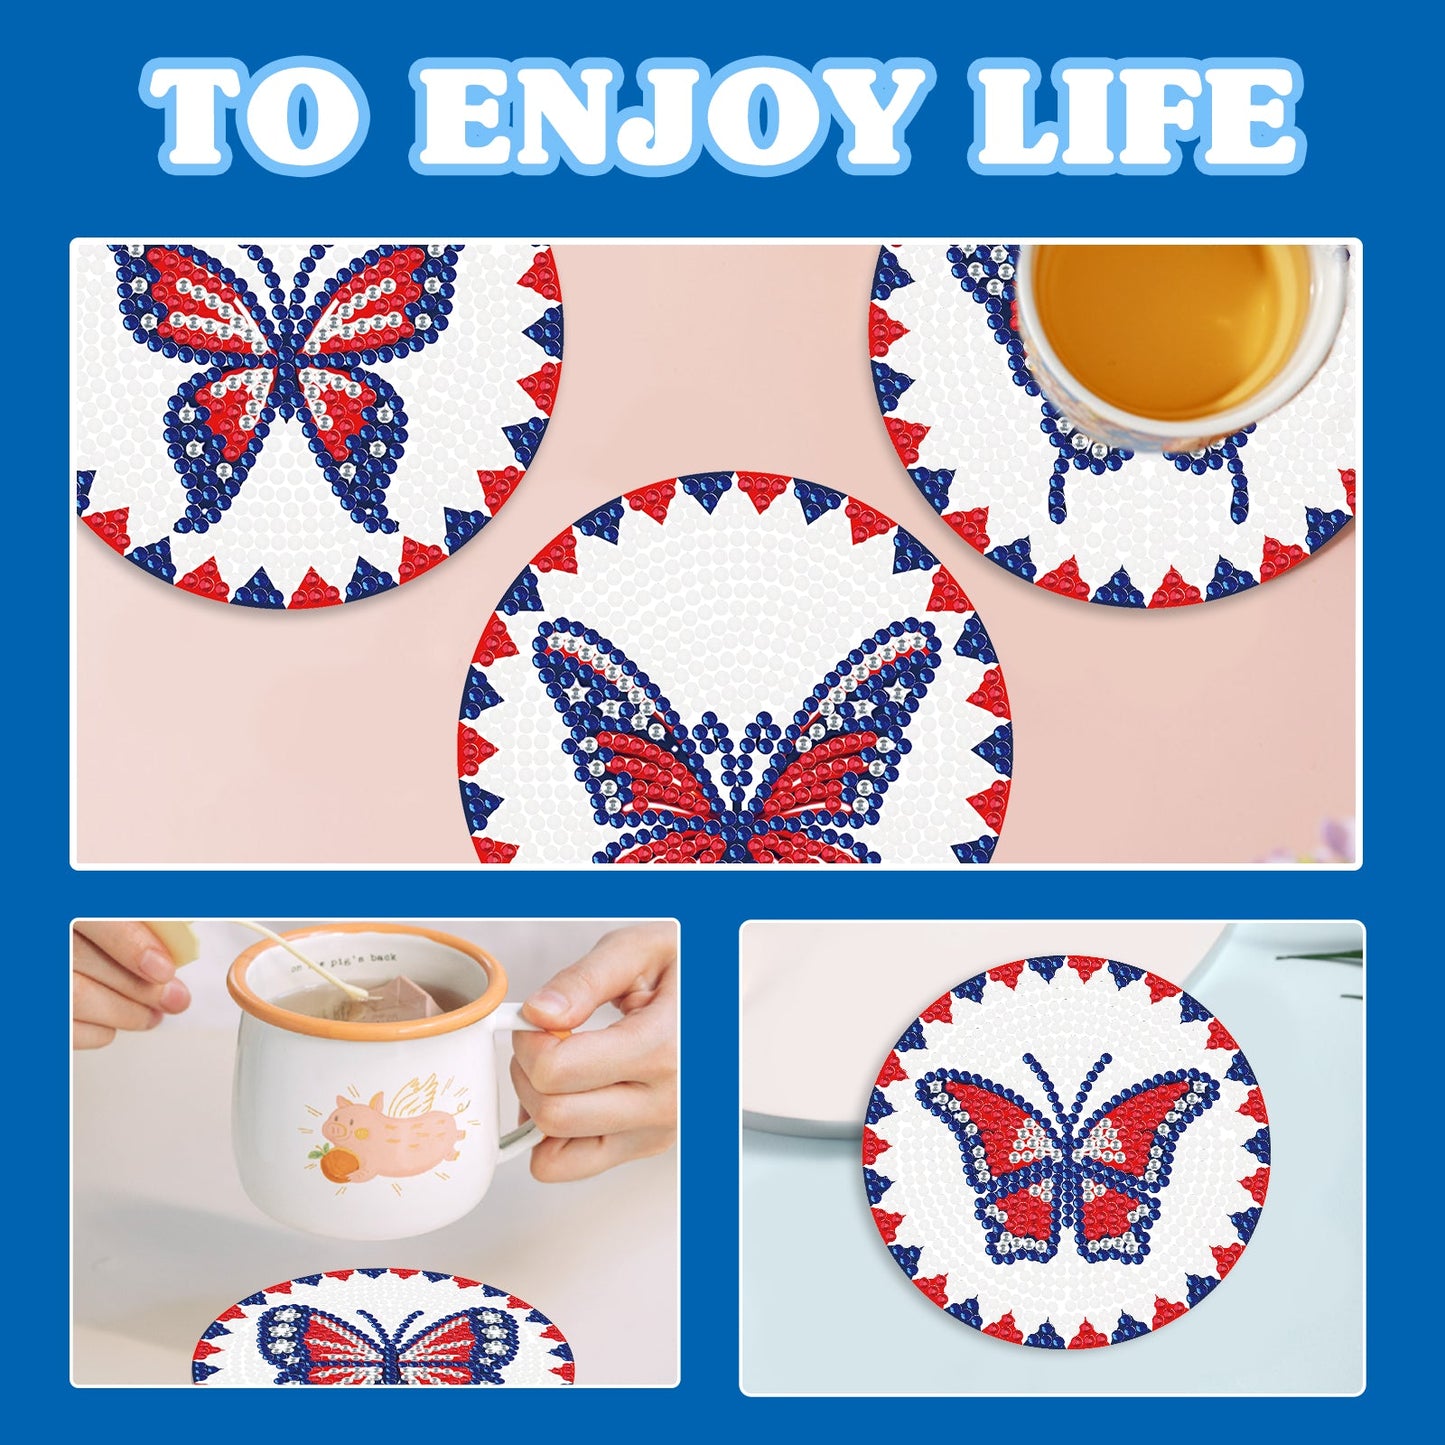 6 pcs set DIY Special Shaped Diamond Painting Coaster | Butterfly